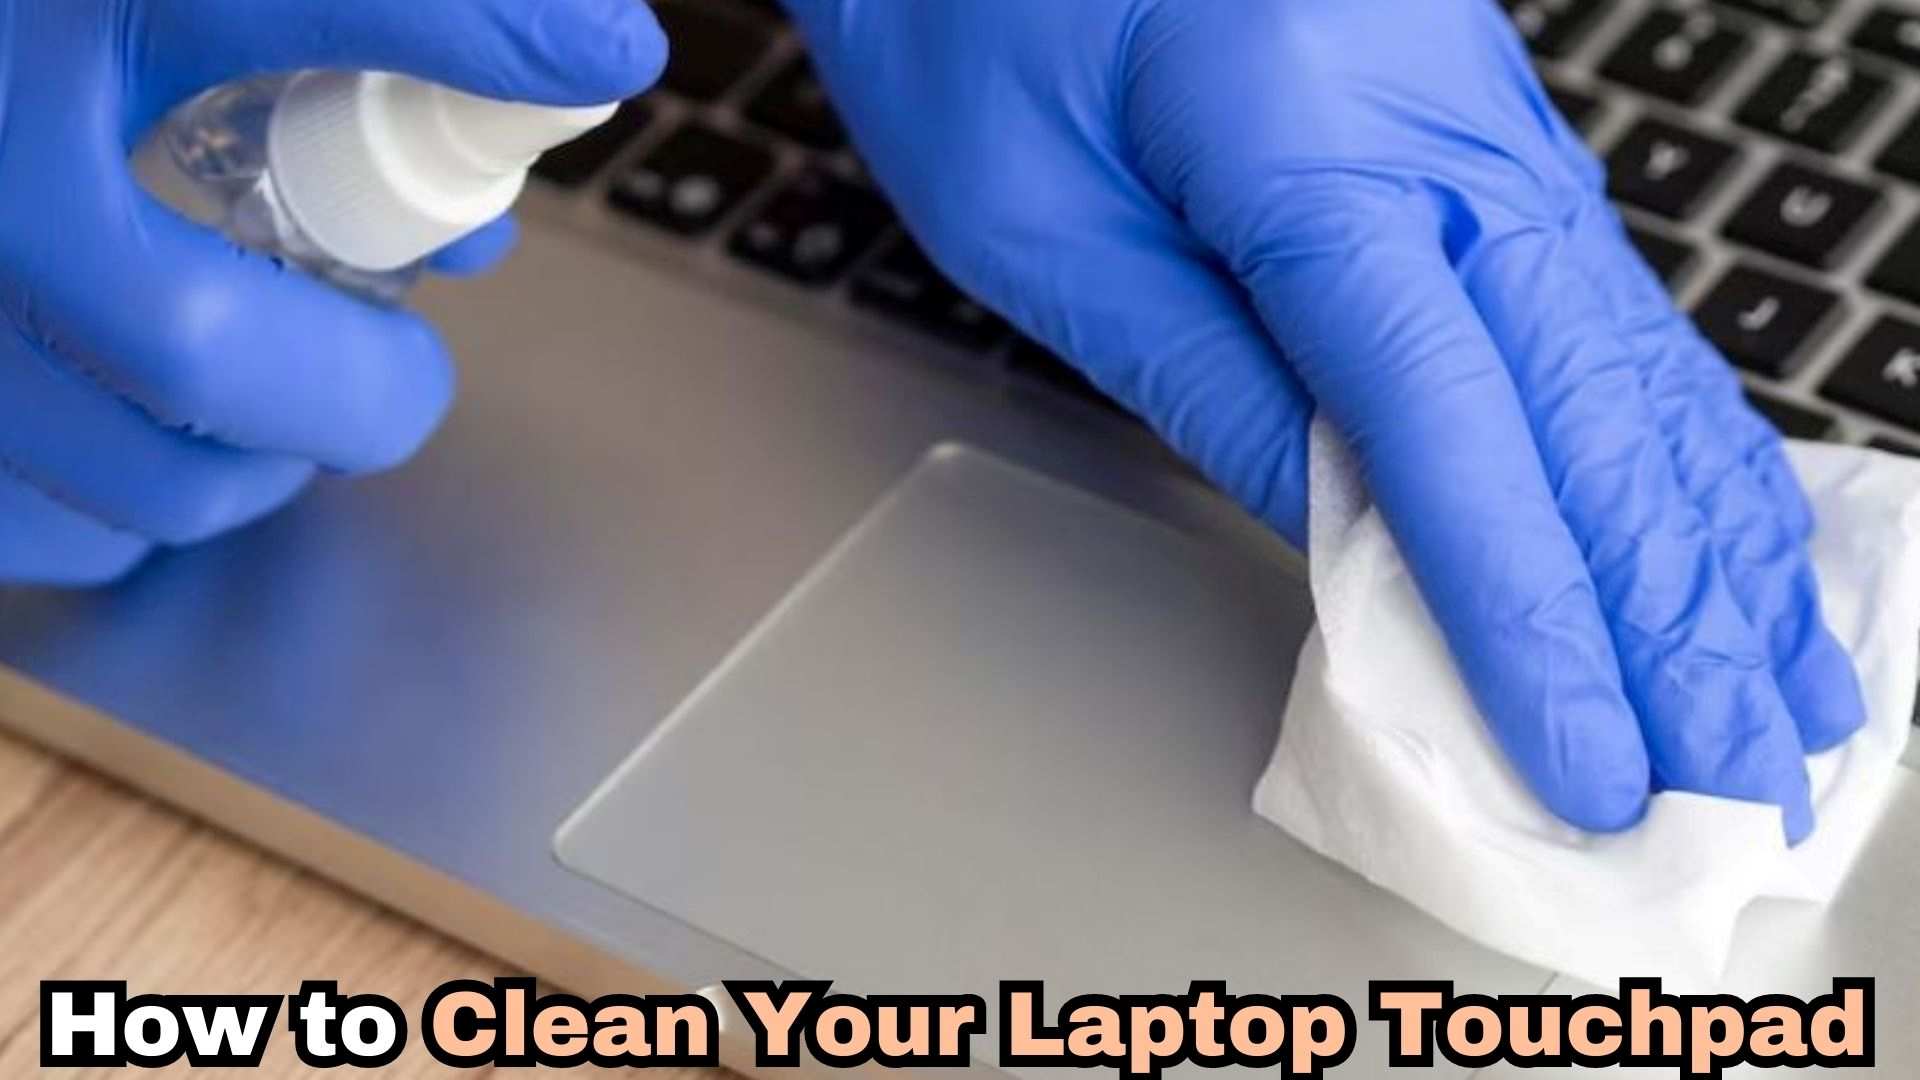 How to Clean Your Laptop Touchpad